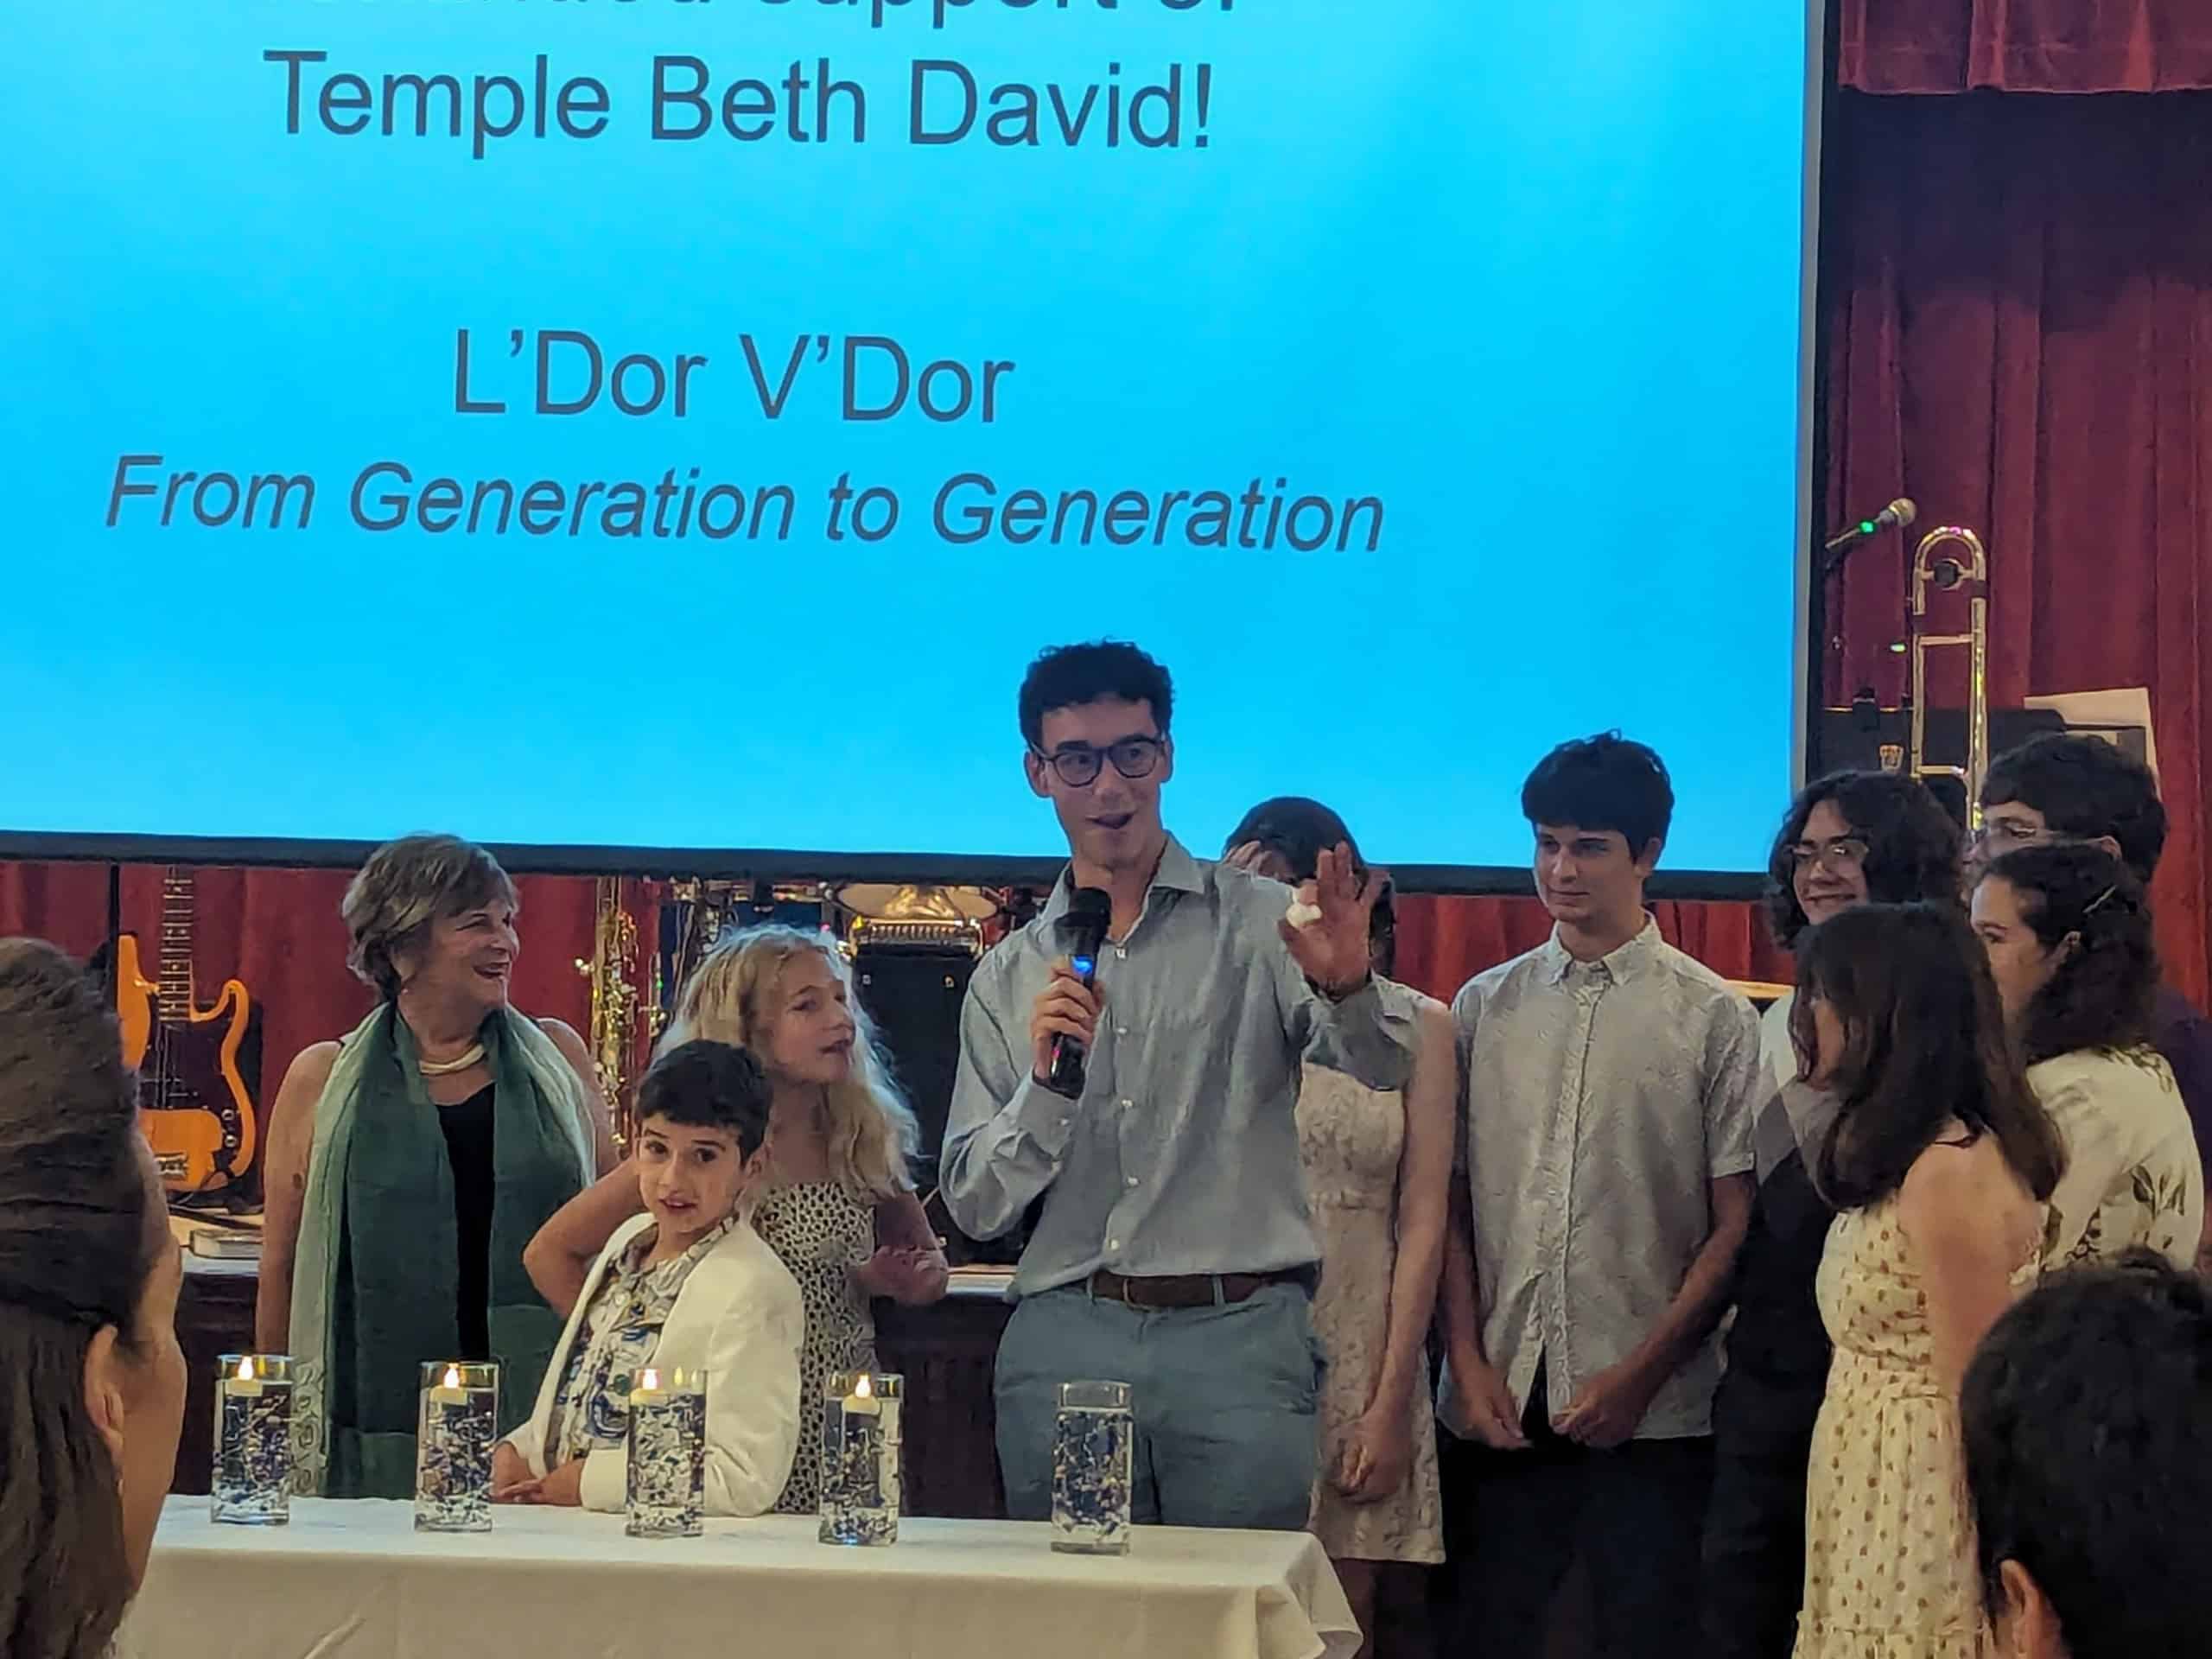 Temple Beth David's L'Dor V'Dor ceremony, celebrating the passage of Jewish tradition and faith from generation to generation. Marlene Shaw, far left, with the next generation [Photo by Julie Maglio]